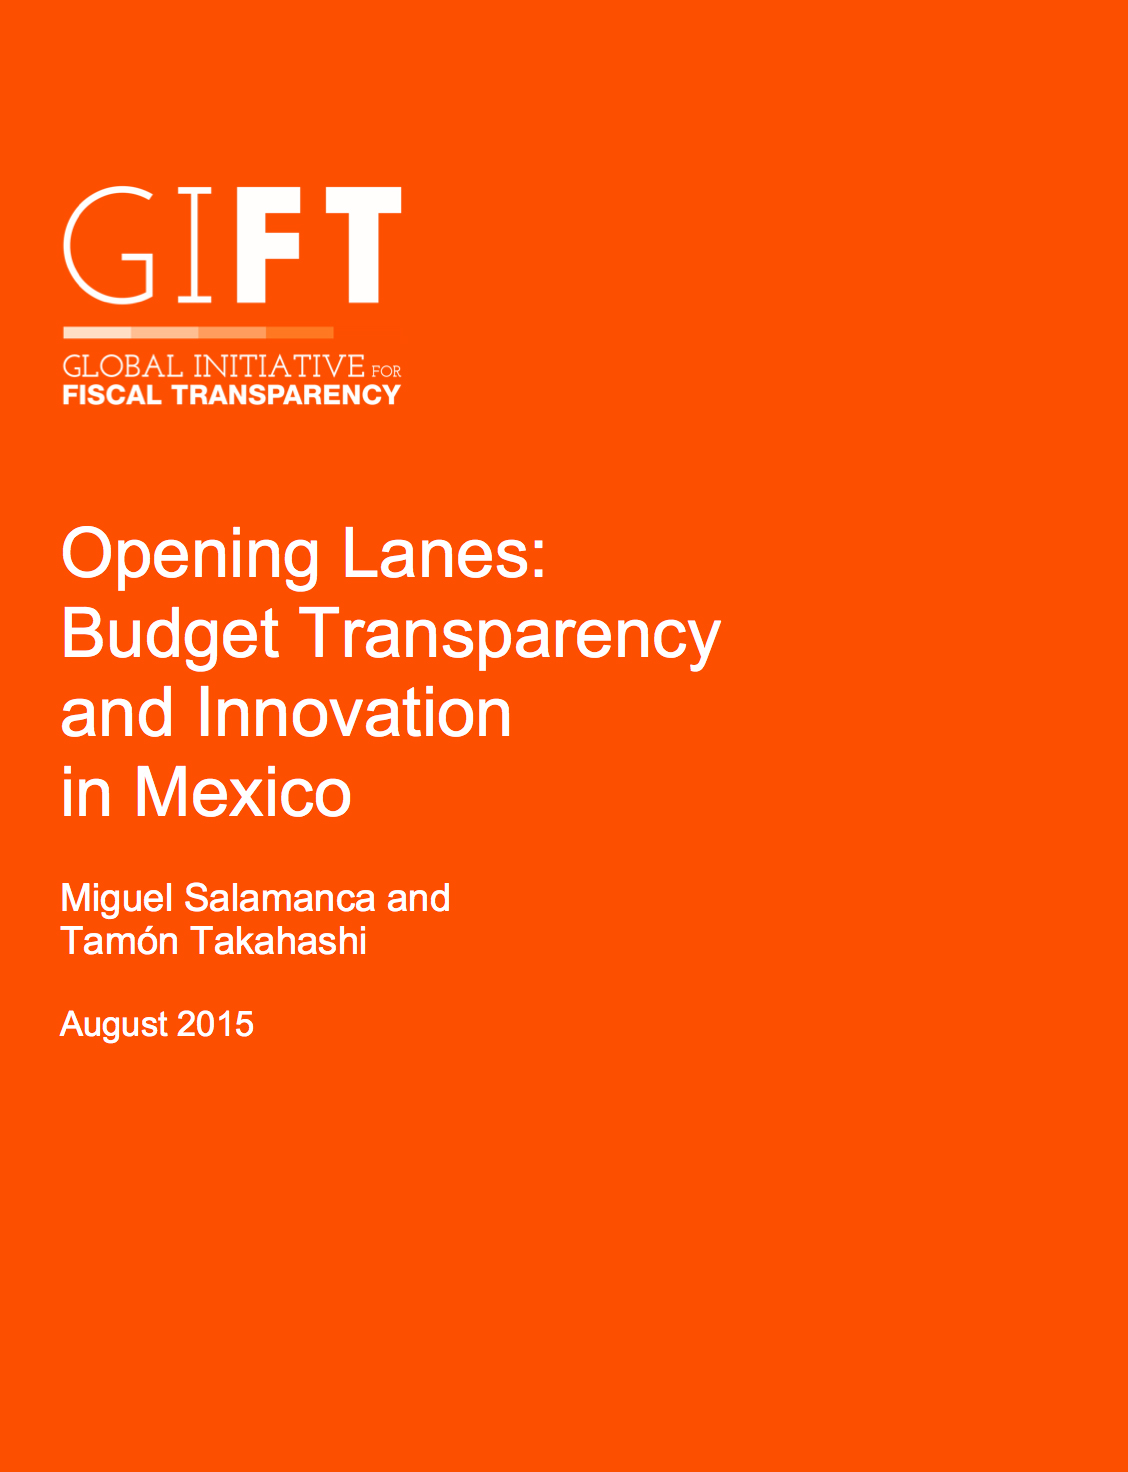 Opening Lanes: Budget Transparency and Innovation in Mexico